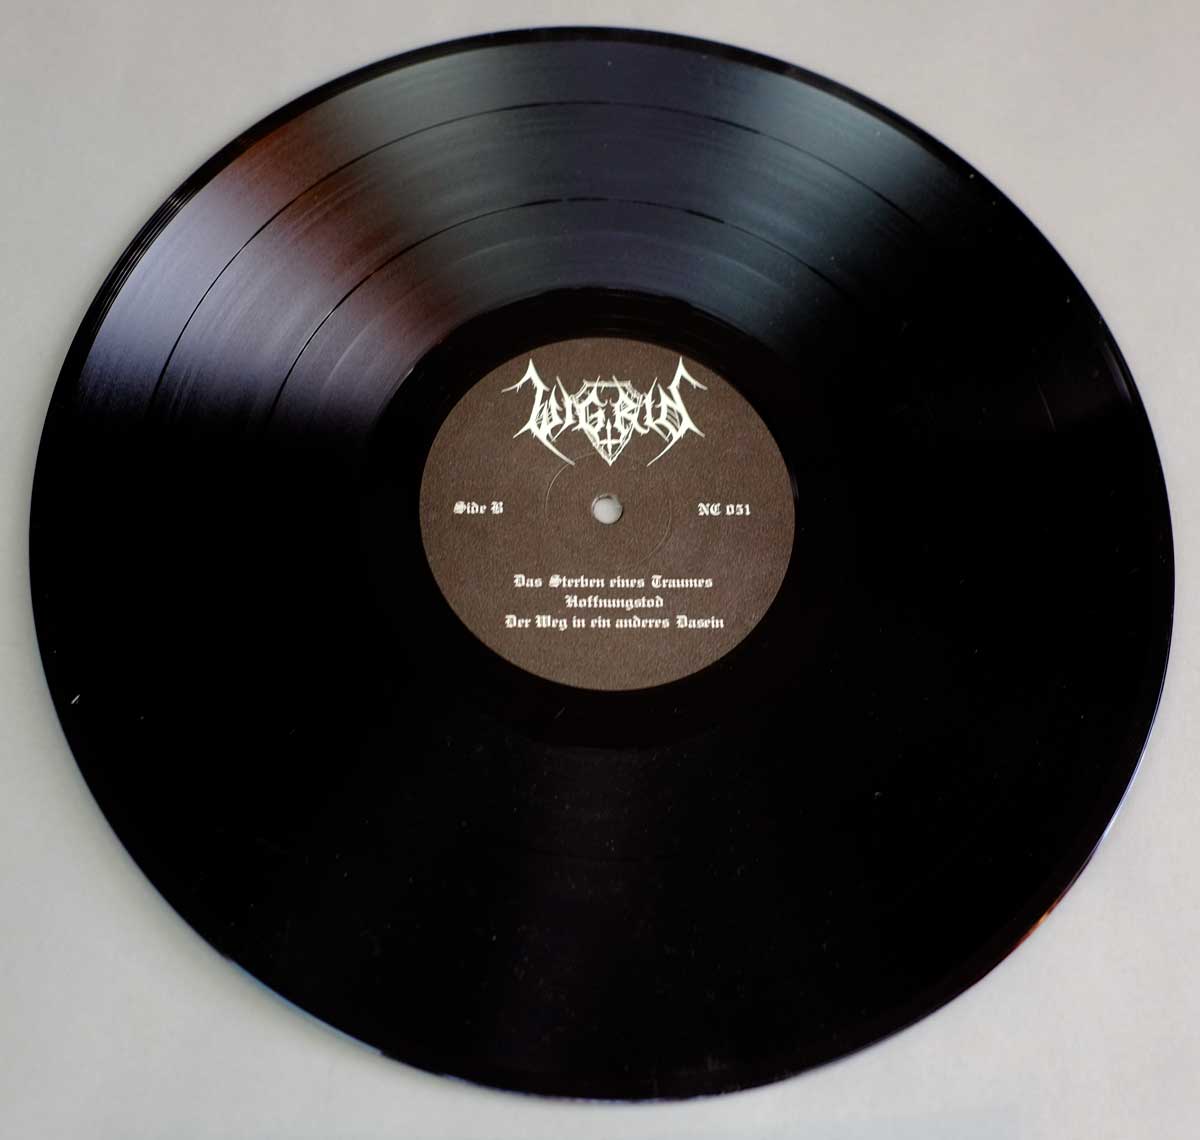 Photo of "WIGRID - Hoffnungstod" 12" LP Record - Side Two: